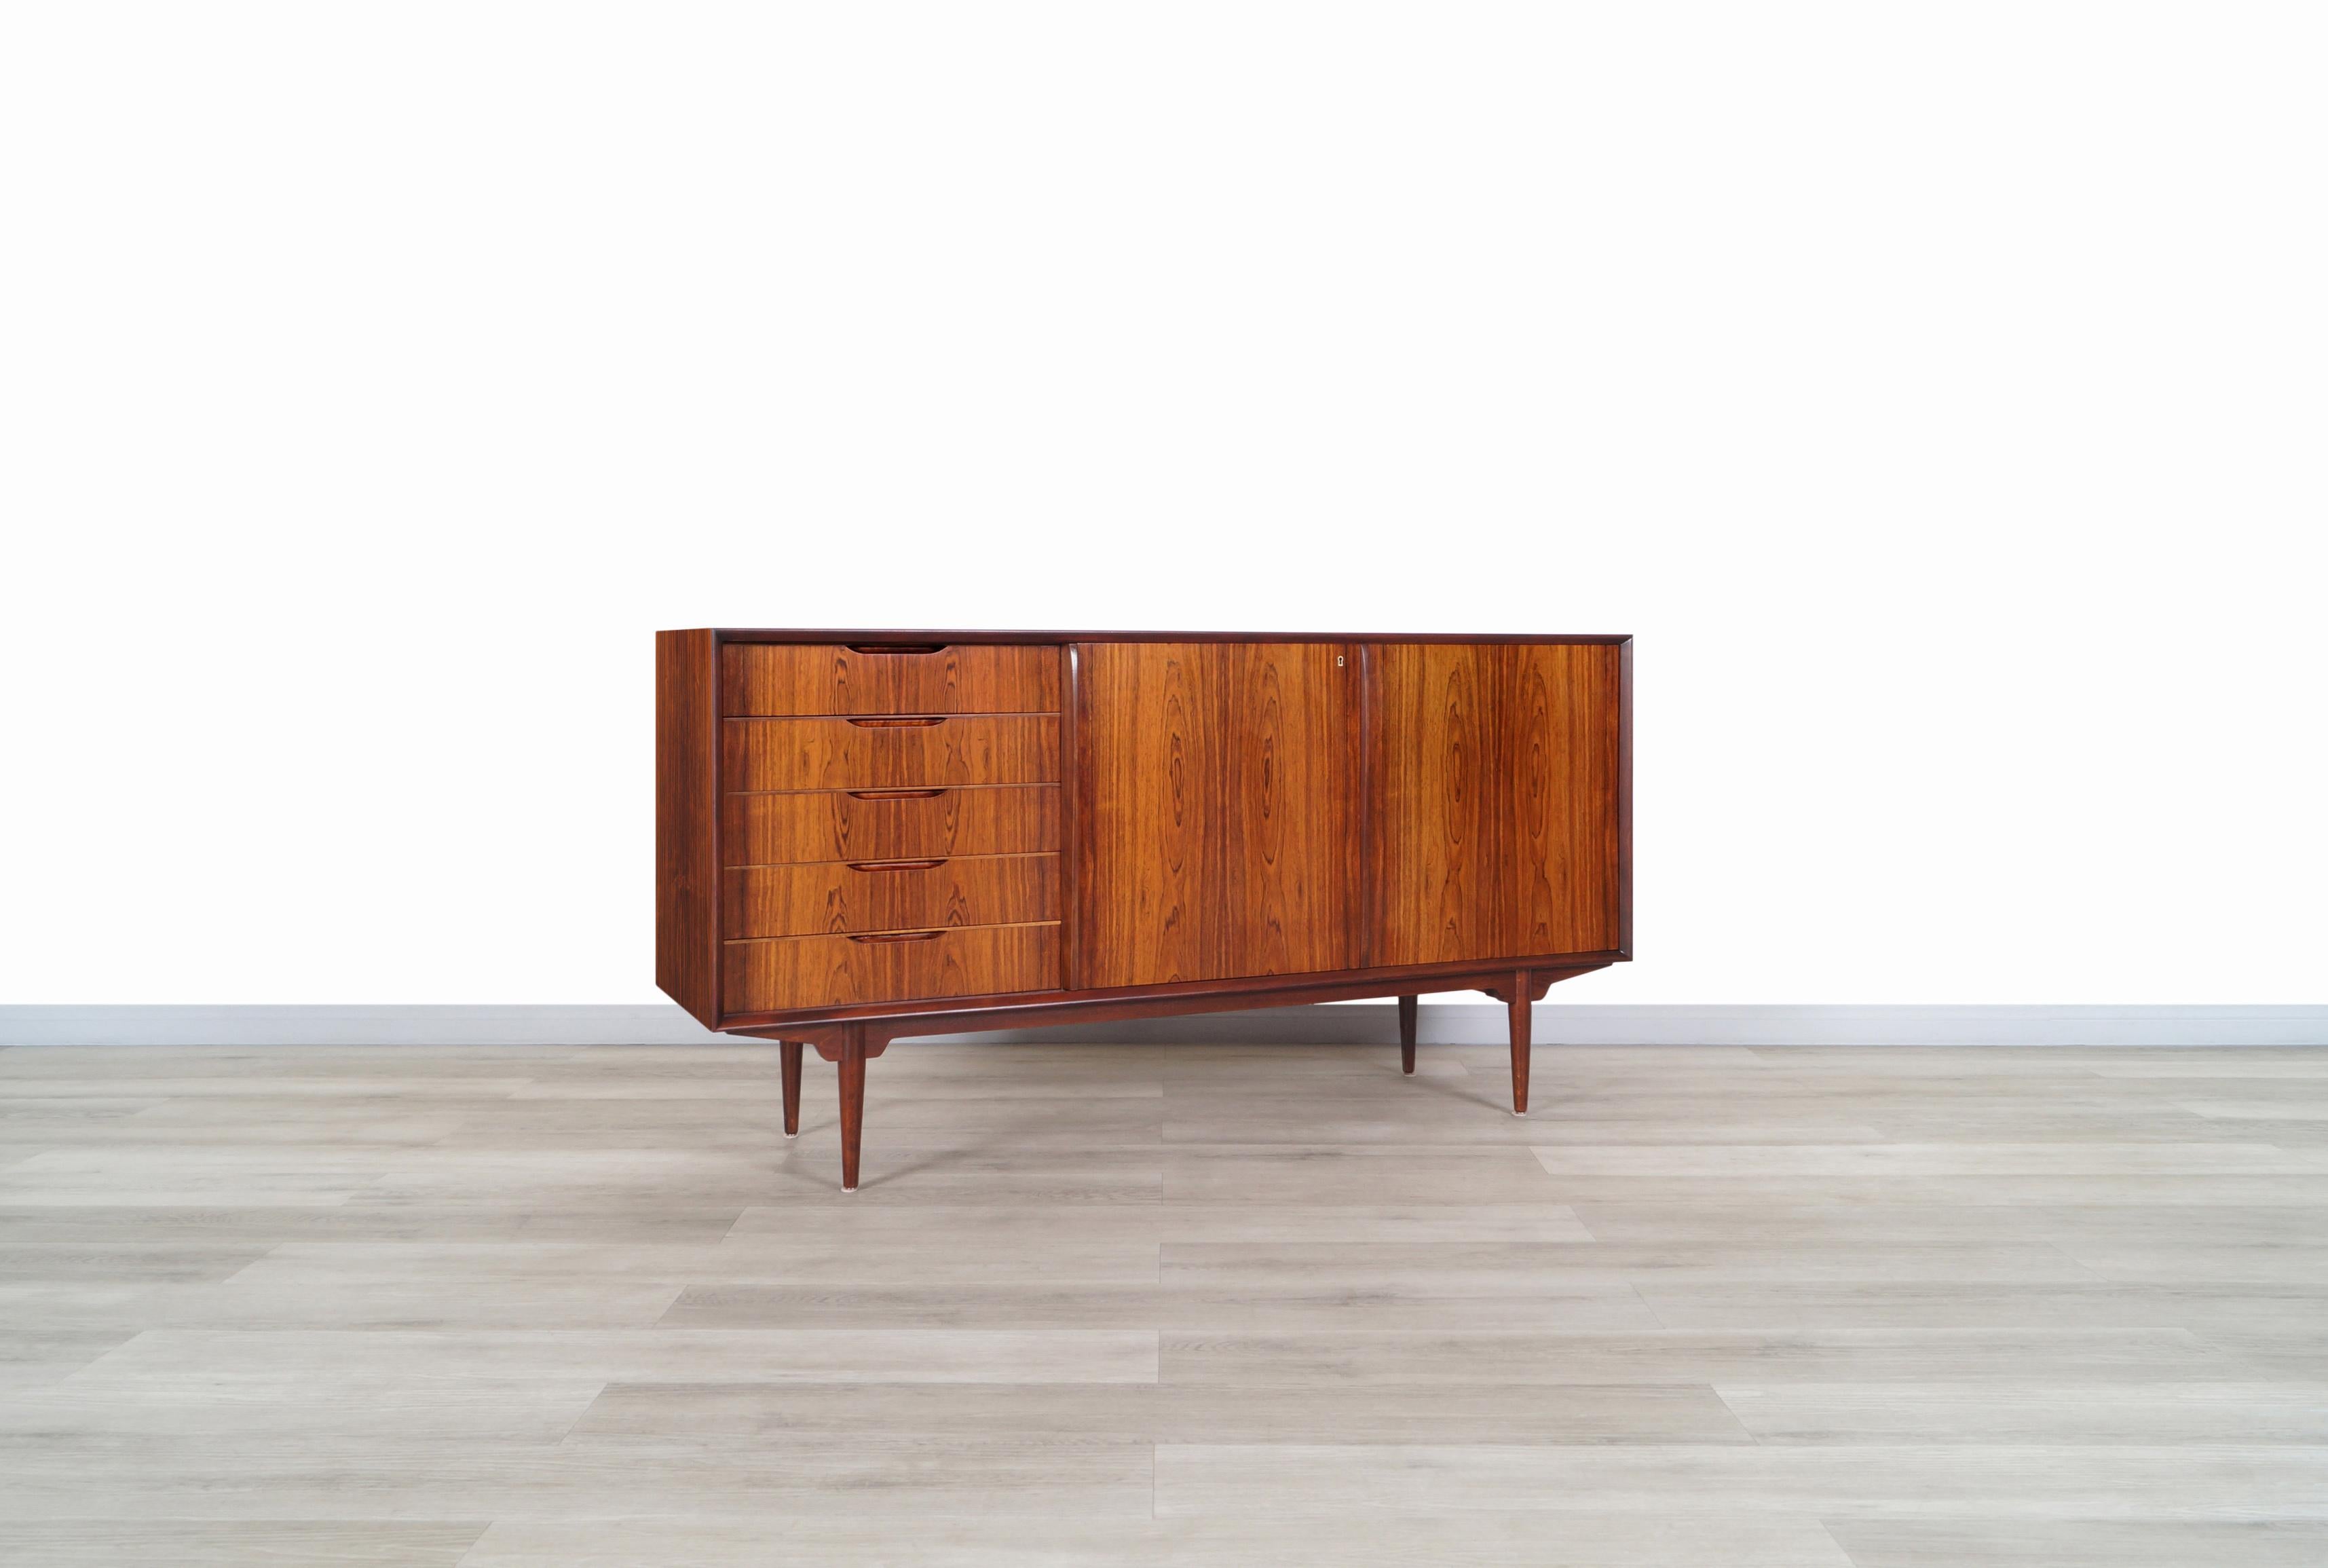 Wonderful mid-century rosewood sideboard designed Svante Skogh and produced by Seffle Mobelfabrik in Sweden, circa 1960s. Features an elegant design where the beautiful Brazilian rosewood grain that surrounds the entire case stands out. On the front